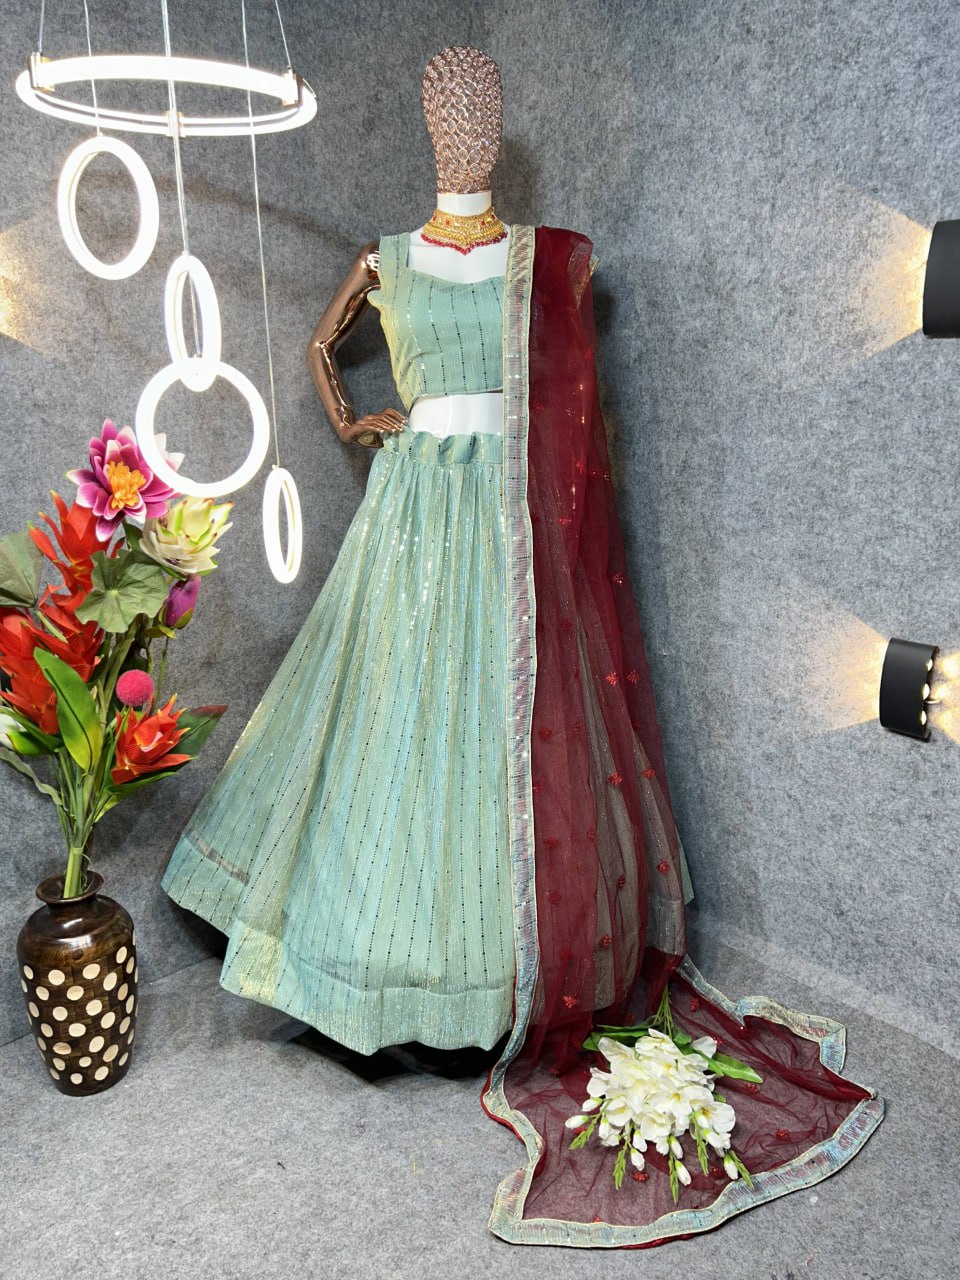 4- Color Attractive Party Wear Fashionable moonlight metallic knit pleated organza crushed fabric for dresses pleated glitter fabric Lehenga choli has a Regular-fit and is Made From High-Grade Fabrics And Yarn.